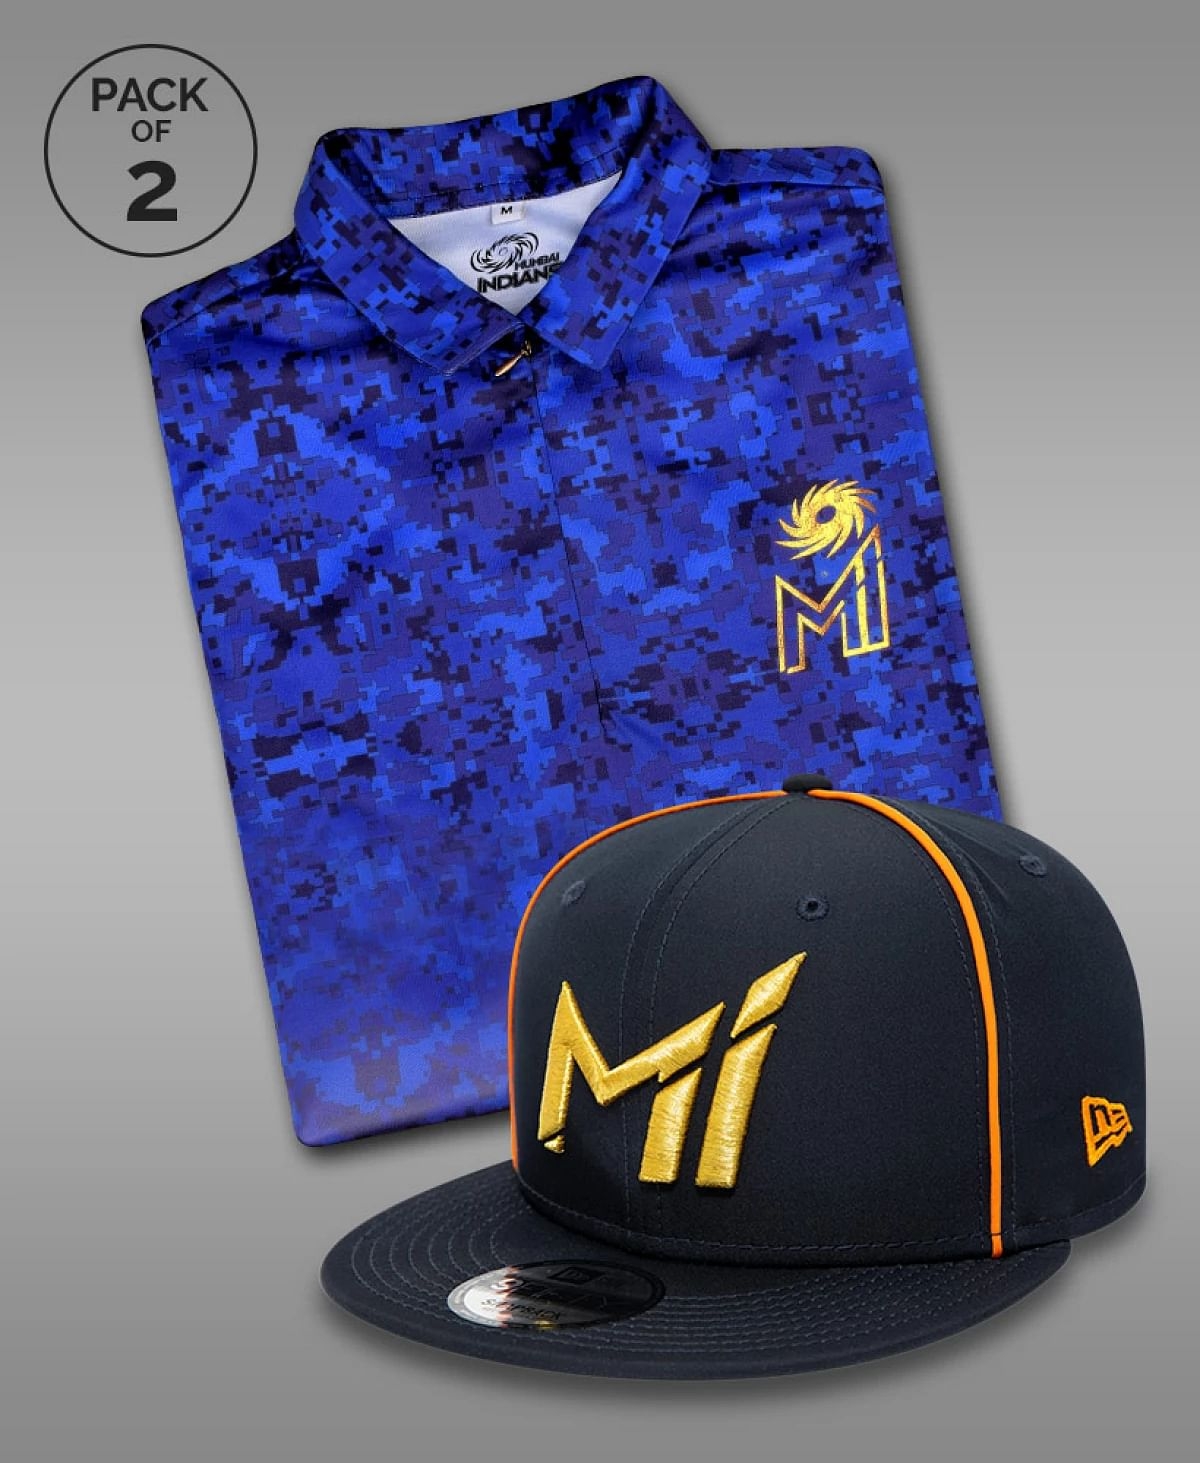 Shop The Arena | MI: Travel Polo and 9Fifty Cap Combo